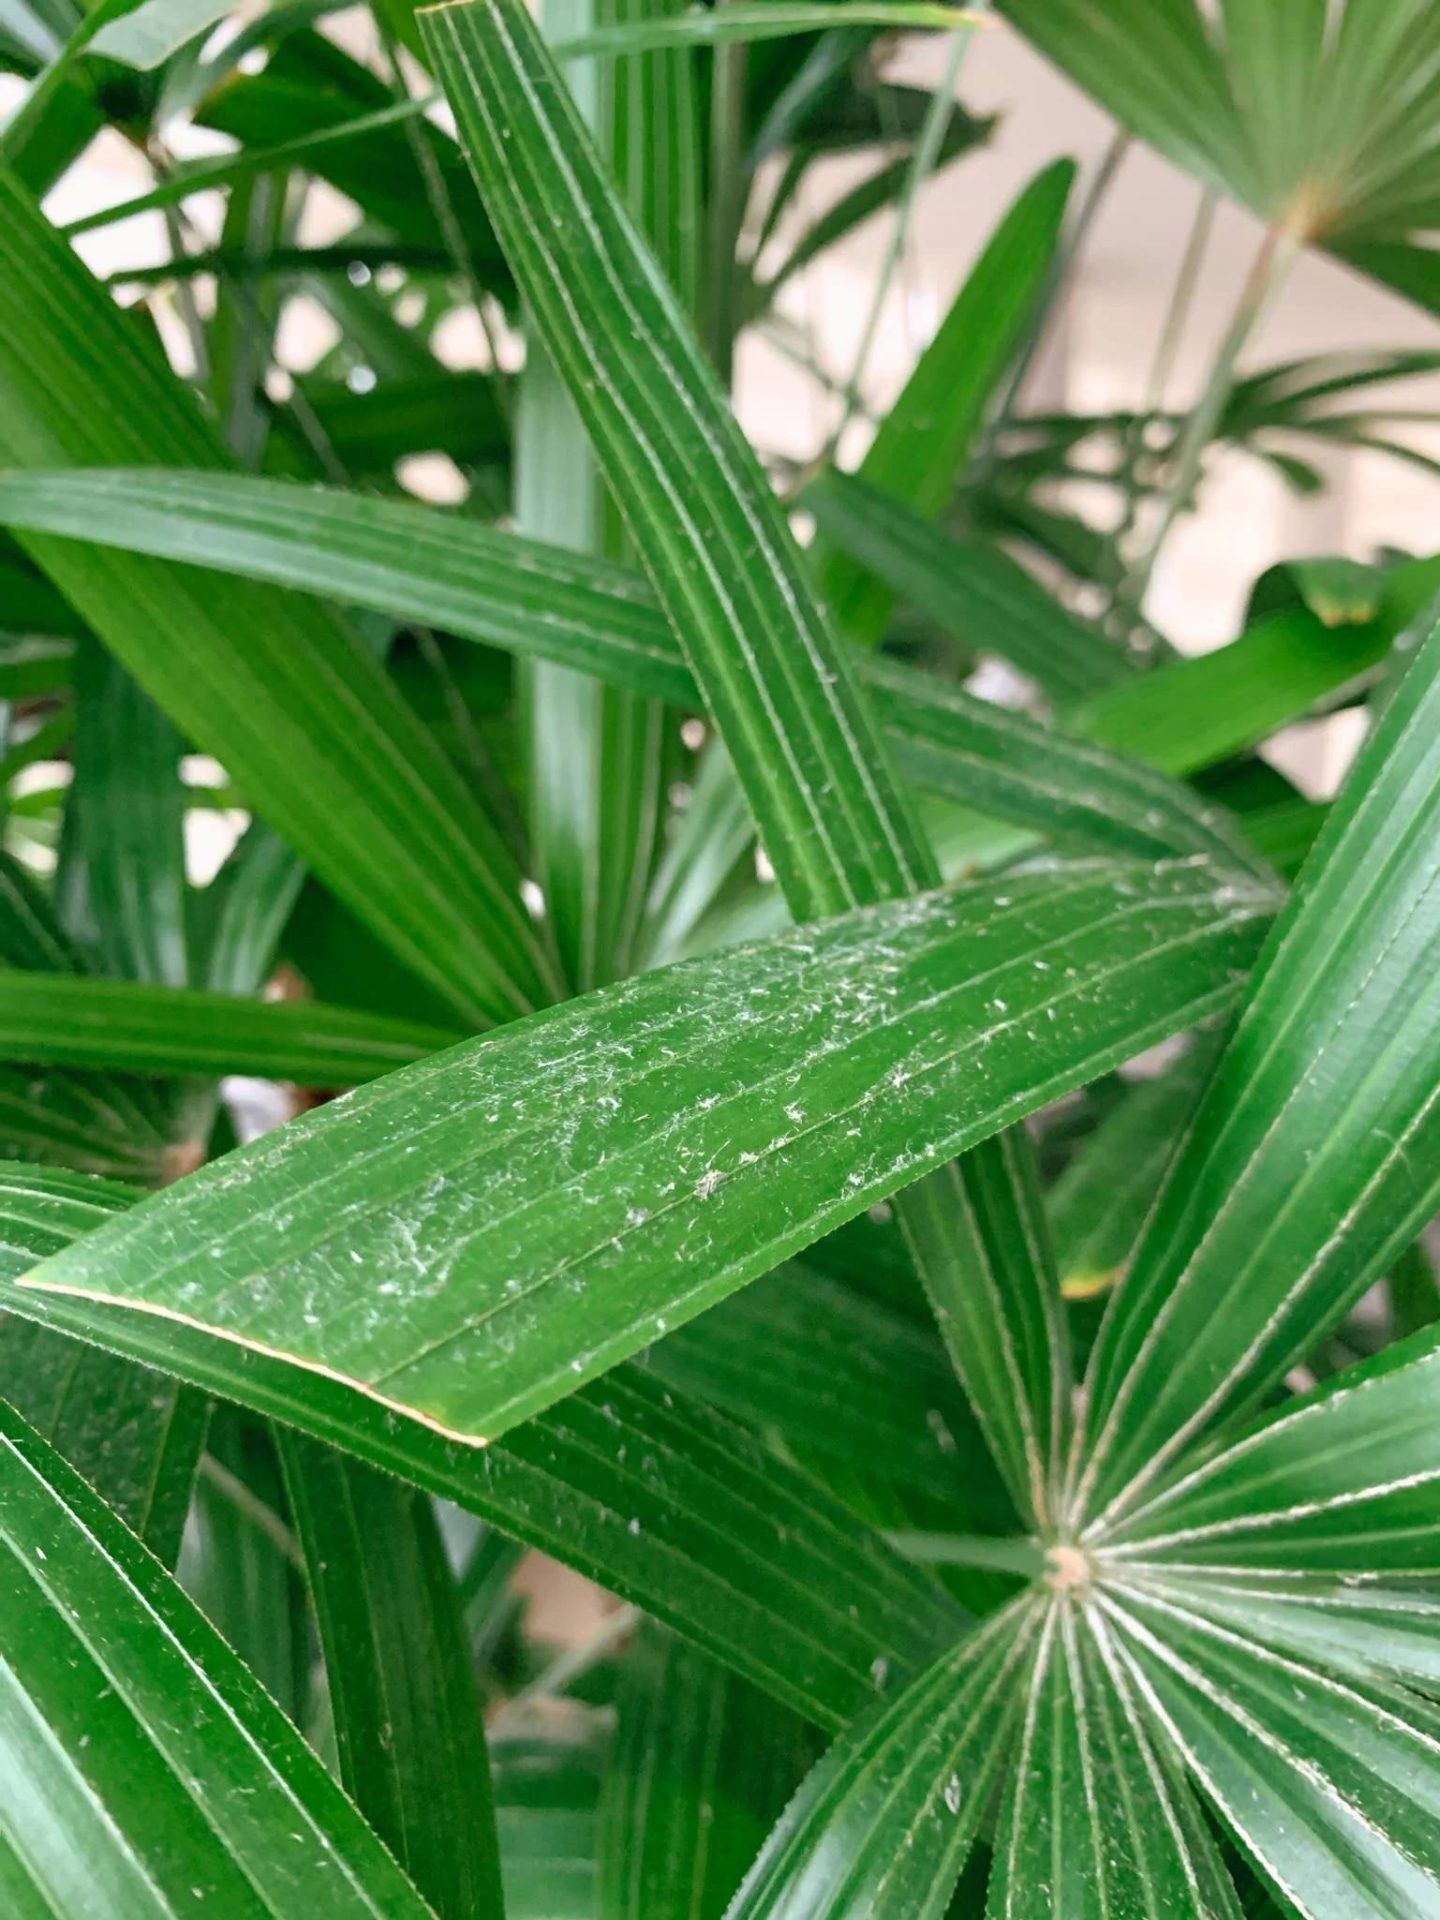 Image of plant leaves covered with dust